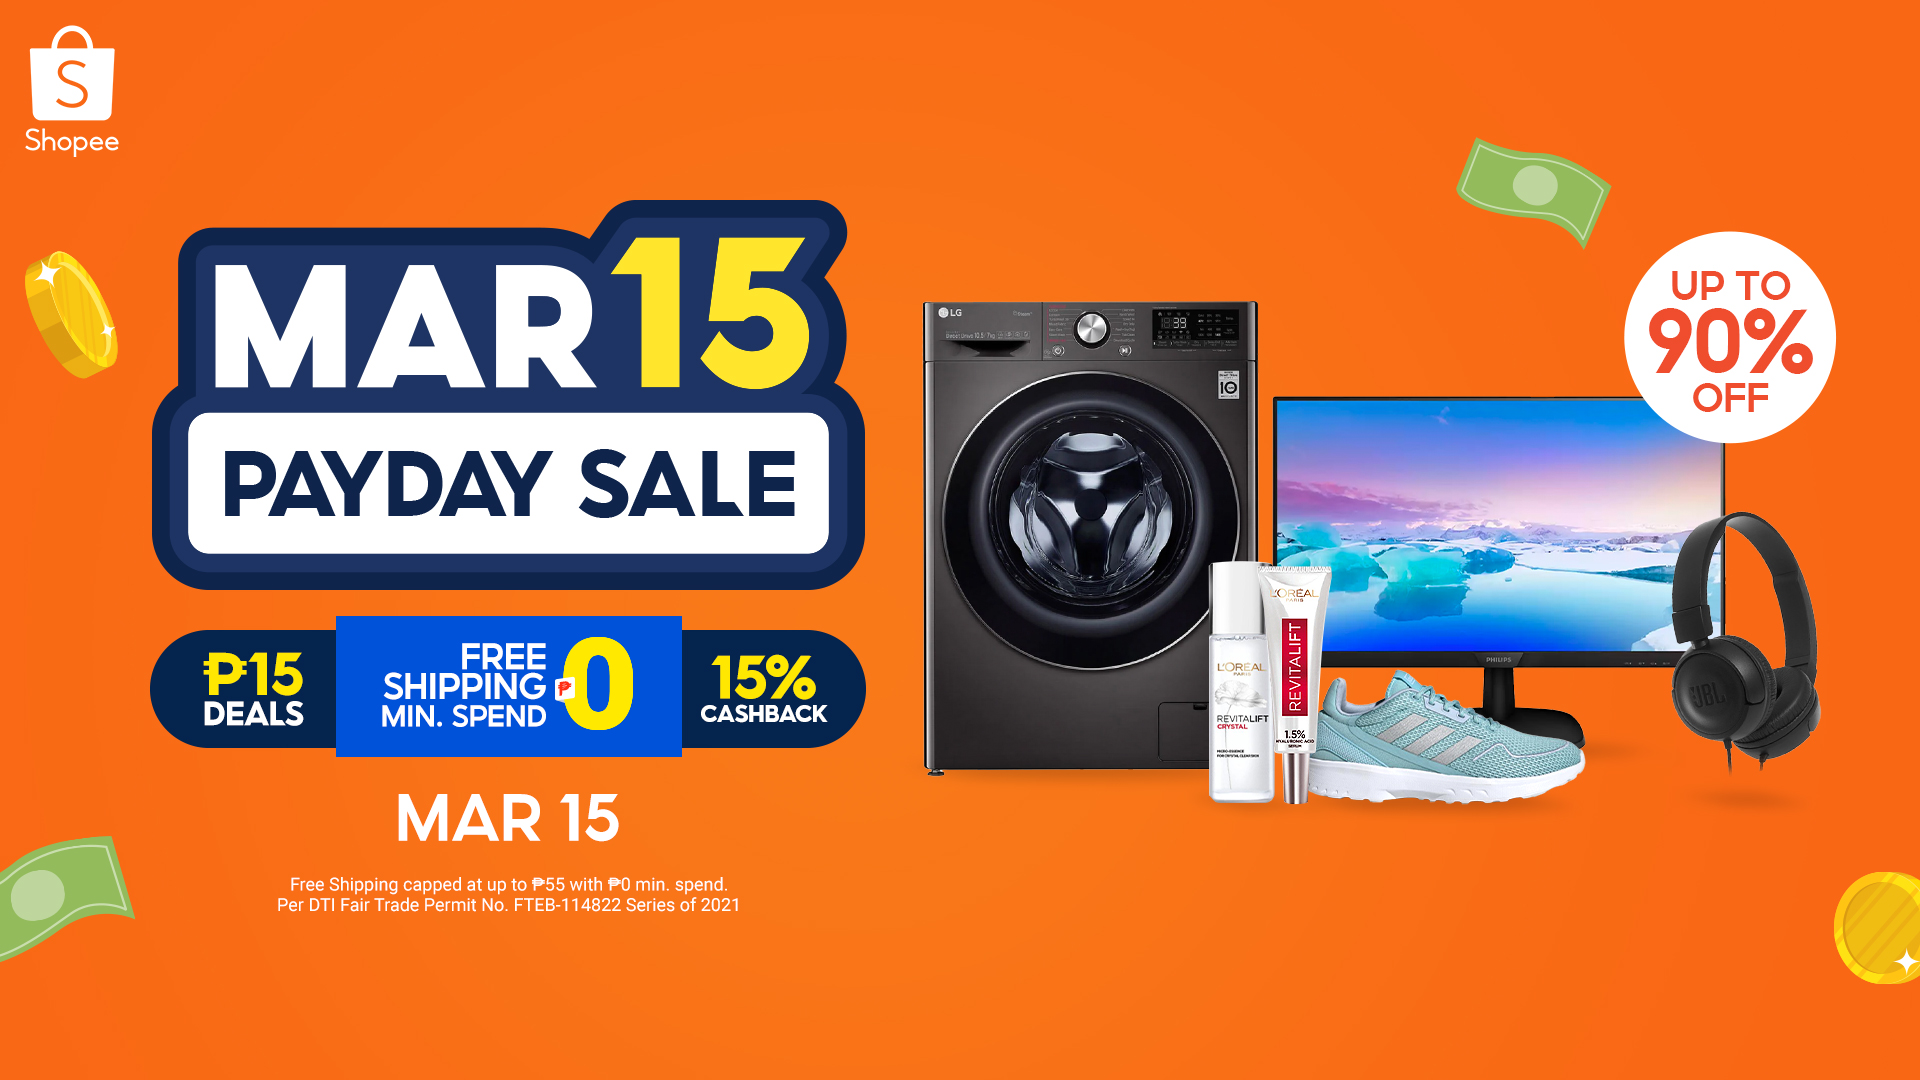 15 Best deals you can find at Shopee’s 3.15 Payday Sale